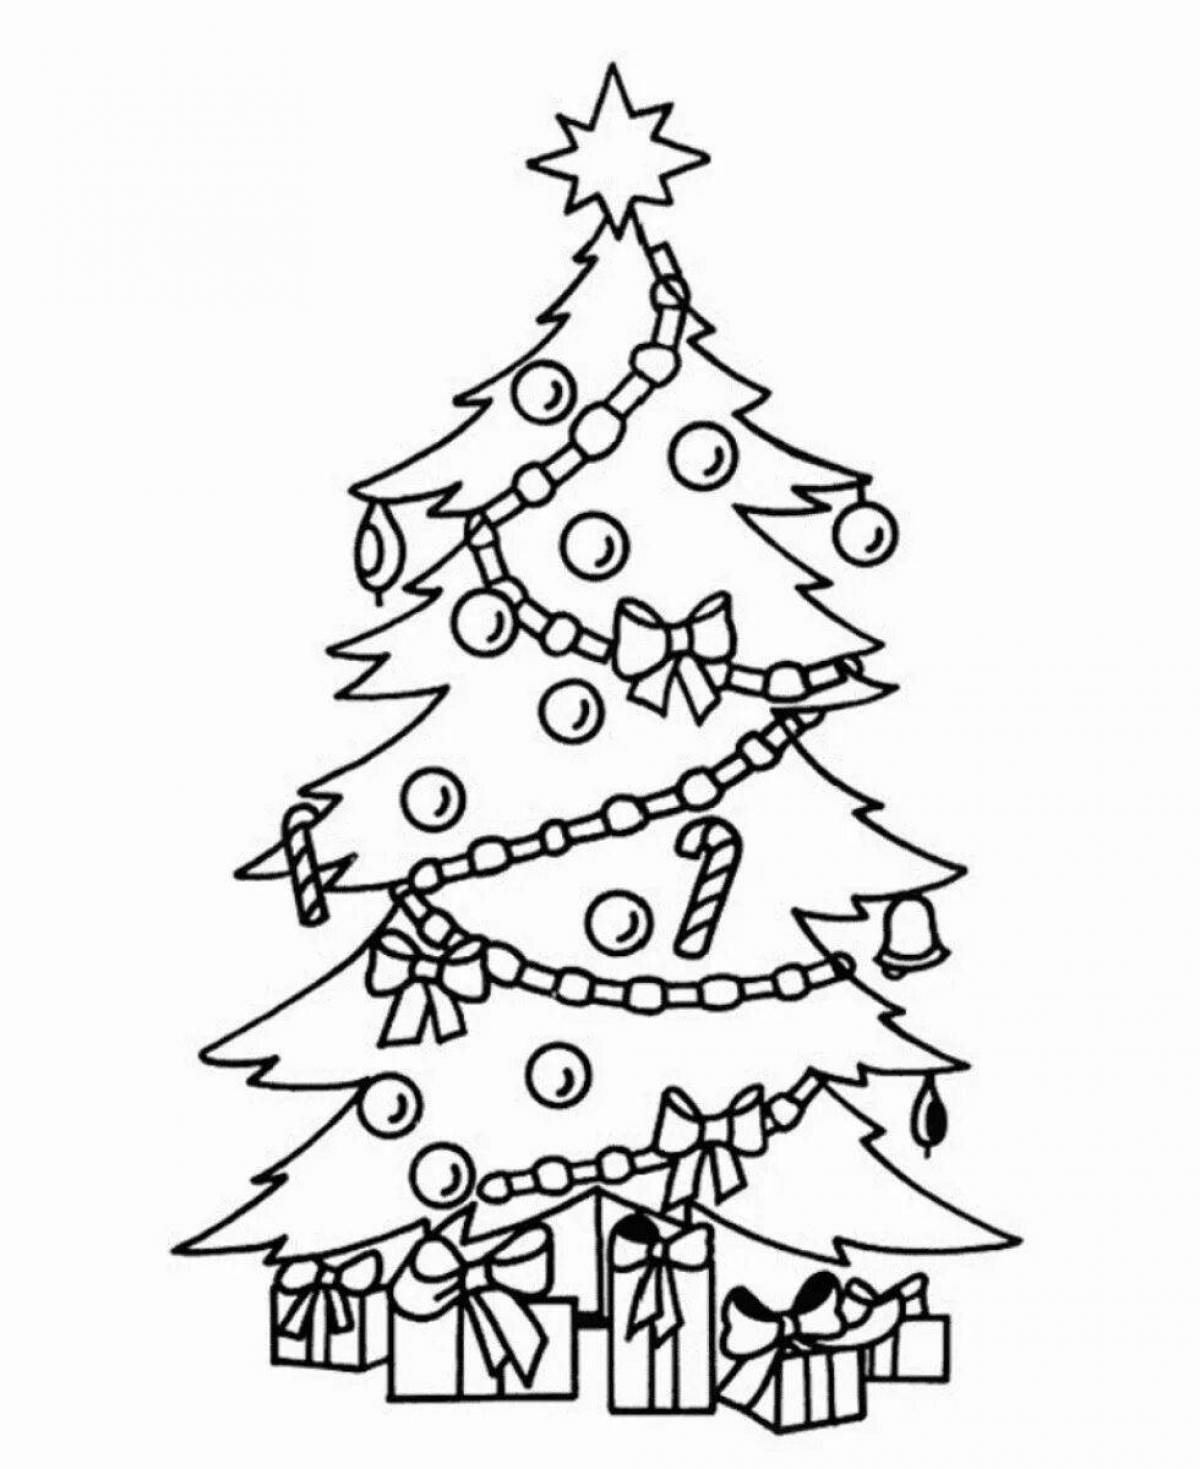 Colorfully decorated Christmas tree coloring book